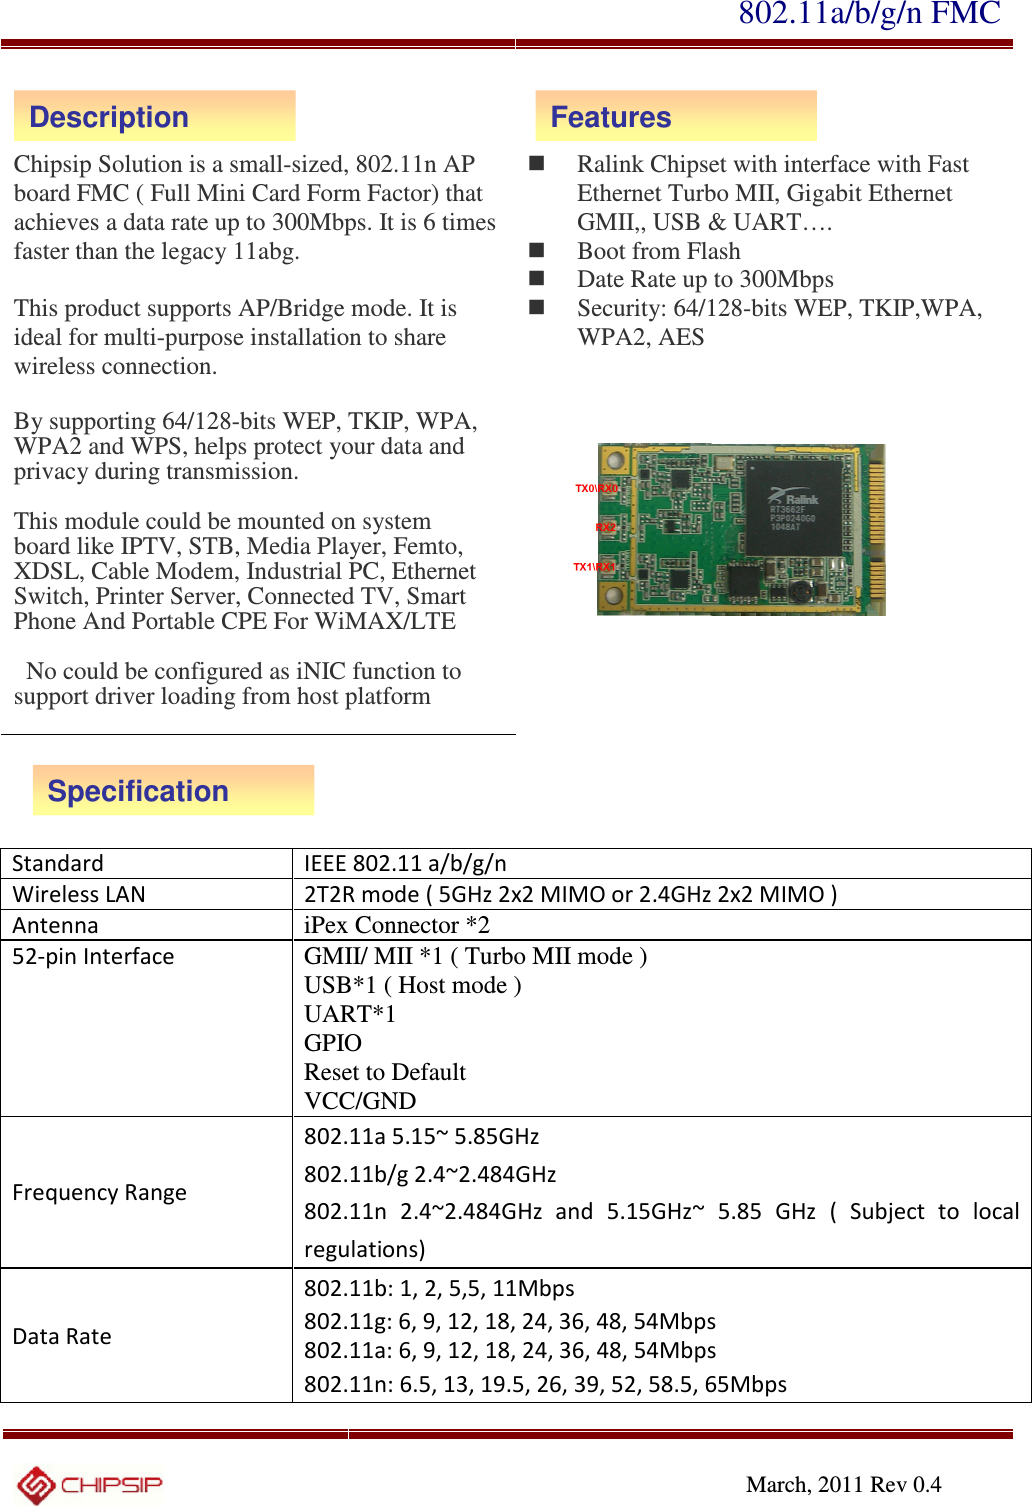  802.11a/b/g/n FMC     March, 2011 Rev 0.4    Chipsip Solution is a small-sized, 802.11n AP board FMC ( Full Mini Card Form Factor) that achieves a data rate up to 300Mbps. It is 6 times faster than the legacy 11abg.  This product supports AP/Bridge mode. It is ideal for multi-purpose installation to share wireless connection.  By supporting 64/128-bits WEP, TKIP, WPA, WPA2 and WPS, helps protect your data and privacy during transmission.  This module could be mounted on system board like IPTV, STB, Media Player, Femto, XDSL, Cable Modem, Industrial PC, Ethernet Switch, Printer Server, Connected TV, Smart Phone And Portable CPE For WiMAX/LTE      No could be configured as iNIC function to support driver loading from host platform     Ralink Chipset with interface with Fast Ethernet Turbo MII, Gigabit Ethernet GMII,, USB &amp; UART….    Boot from Flash    Date Rate up to 300Mbps  Security: 64/128-bits WEP, TKIP,WPA, WPA2, AES       Standard IEEE 802.11 a/b/g/n  Wireless LAN  2T2R mode ( 5GHz 2x2 MIMO or 2.4GHz 2x2 MIMO ) Antenna iPex Connector *2 52-pin Interface  GMII/ MII *1 ( Turbo MII mode )   USB*1 ( Host mode ) UART*1 GPIO Reset to Default   VCC/GND  Frequency Range 802.11a 5.15~ 5.85GHz 802.11b/g 2.4~2.484GHz 802.11n  2.4~2.484GHz  and  5.15GHz~  5.85  GHz  (  Subject  to  local regulations) Data Rate 802.11b: 1, 2, 5,5, 11Mbps 802.11g: 6, 9, 12, 18, 24, 36, 48, 54Mbps 802.11a: 6, 9, 12, 18, 24, 36, 48, 54Mbps 802.11n: 6.5, 13, 19.5, 26, 39, 52, 58.5, 65Mbps Description Features Specification 